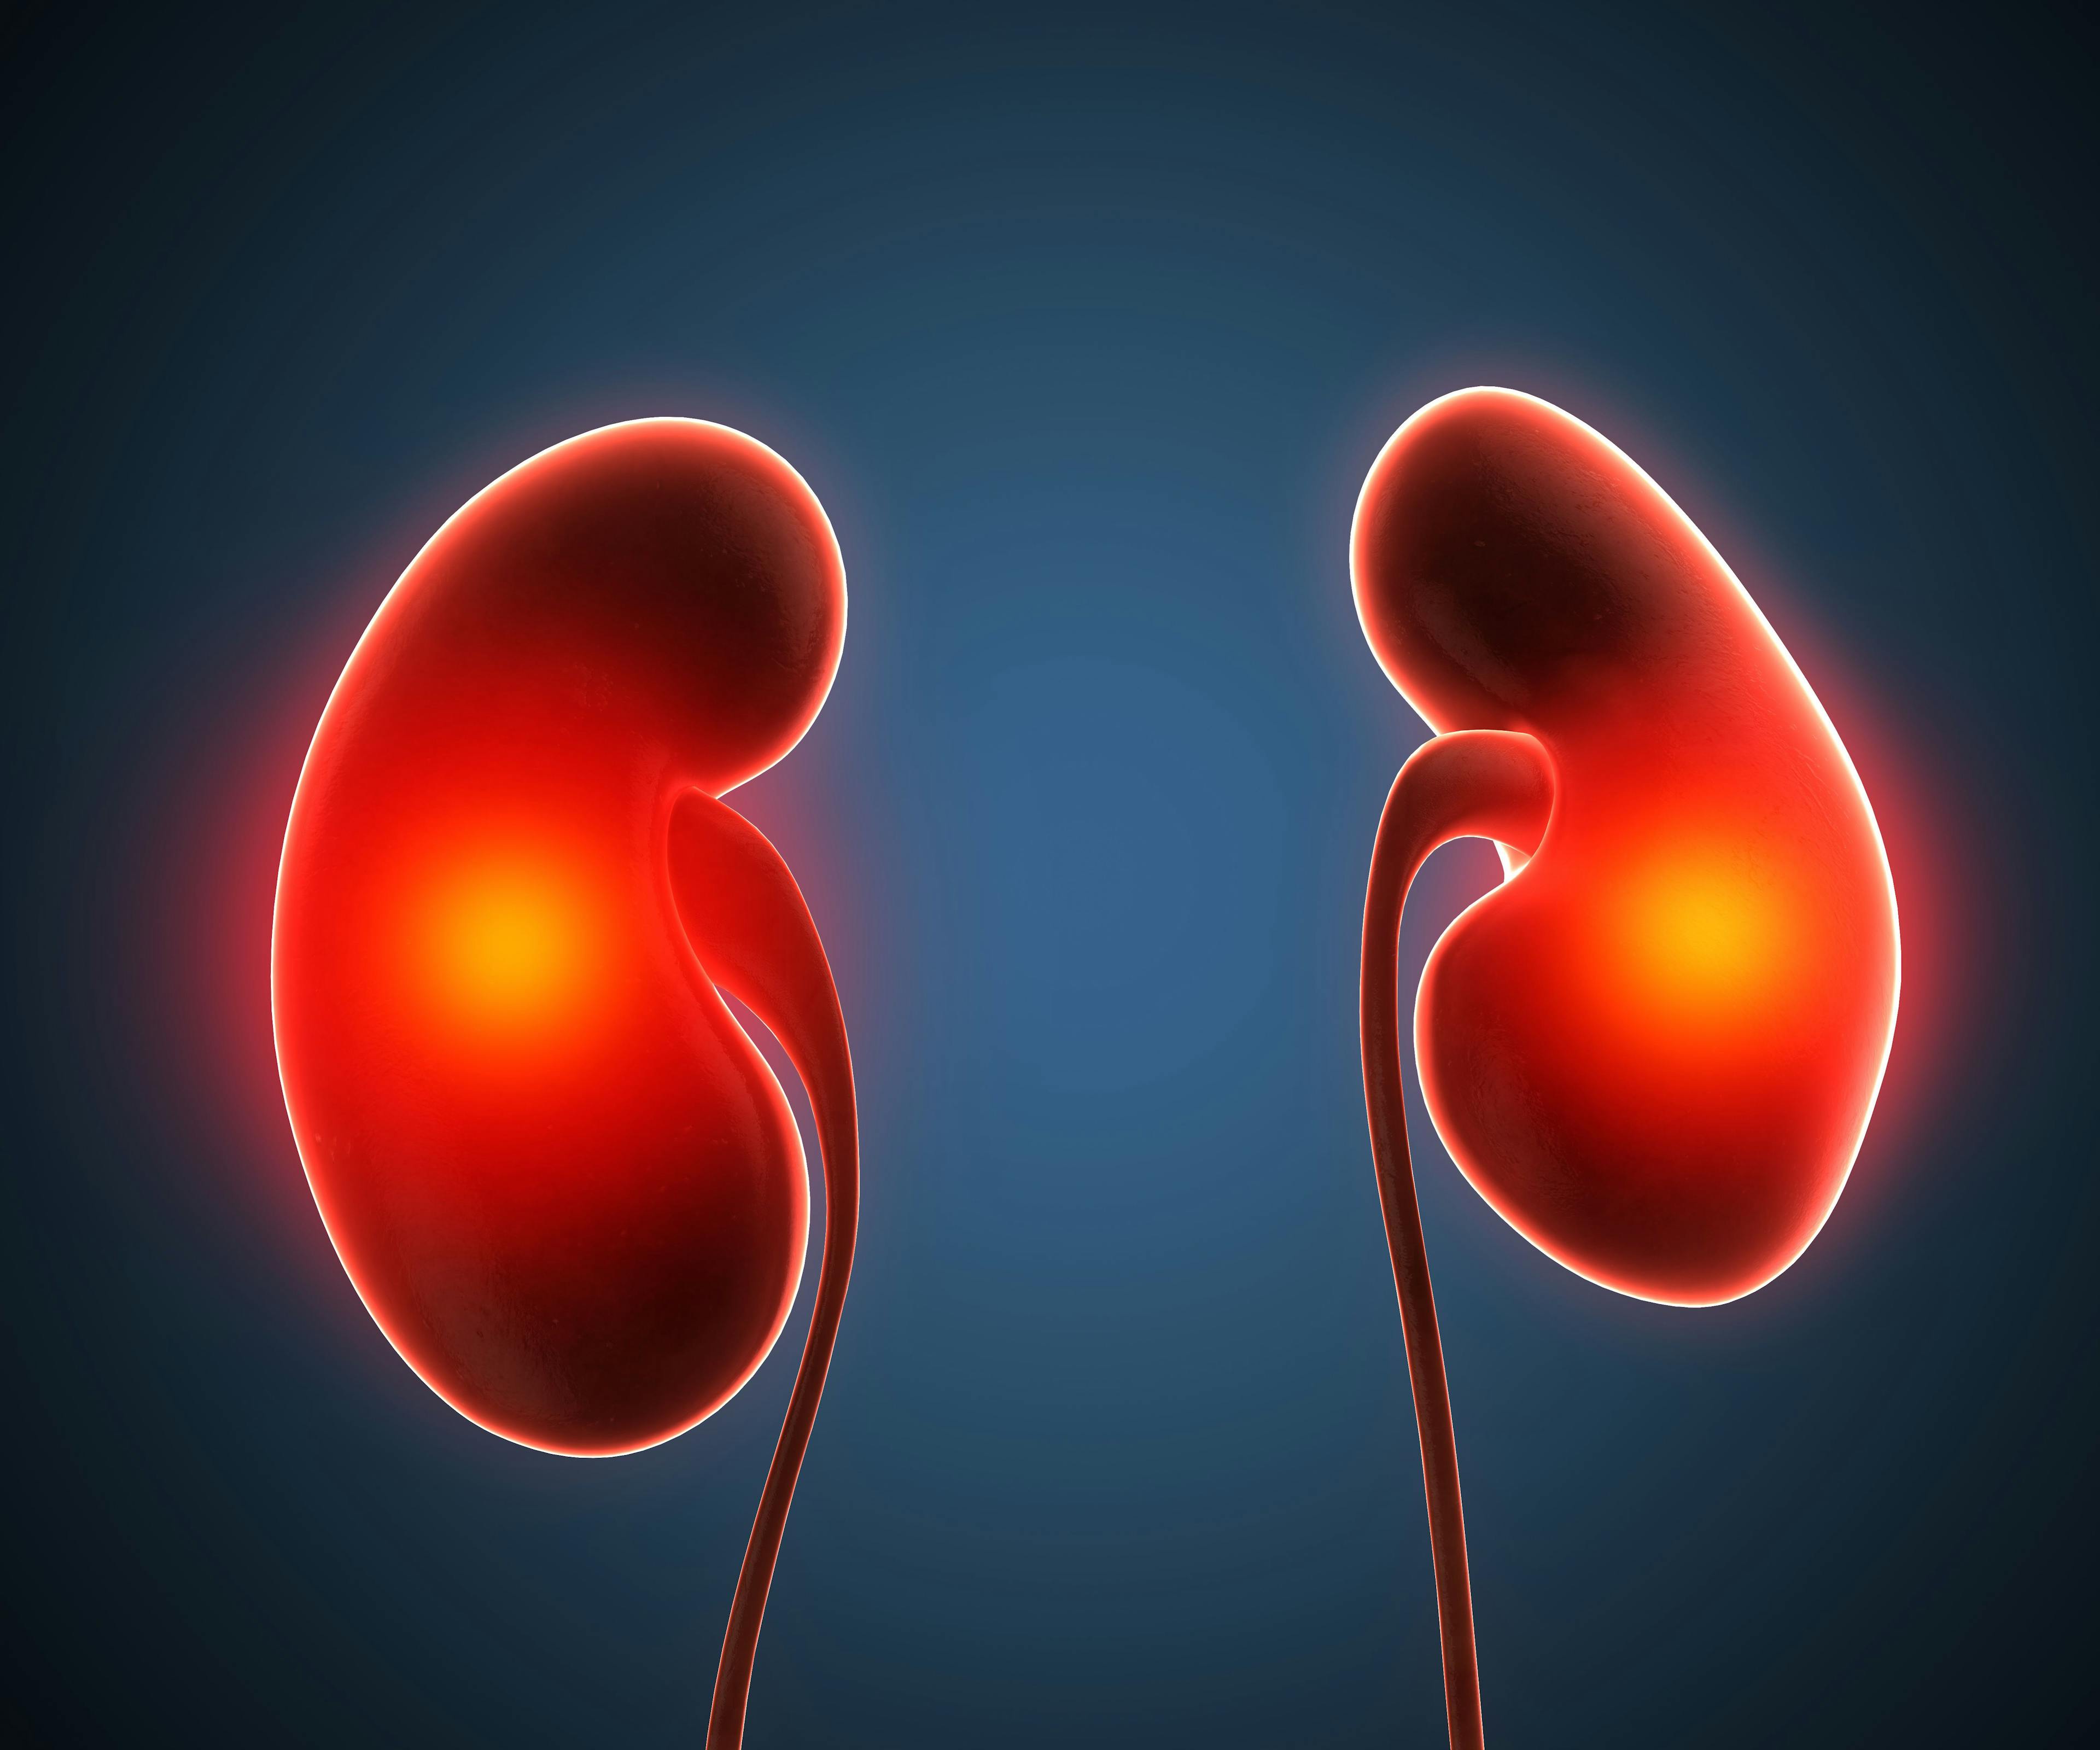 Image of two kidneys.